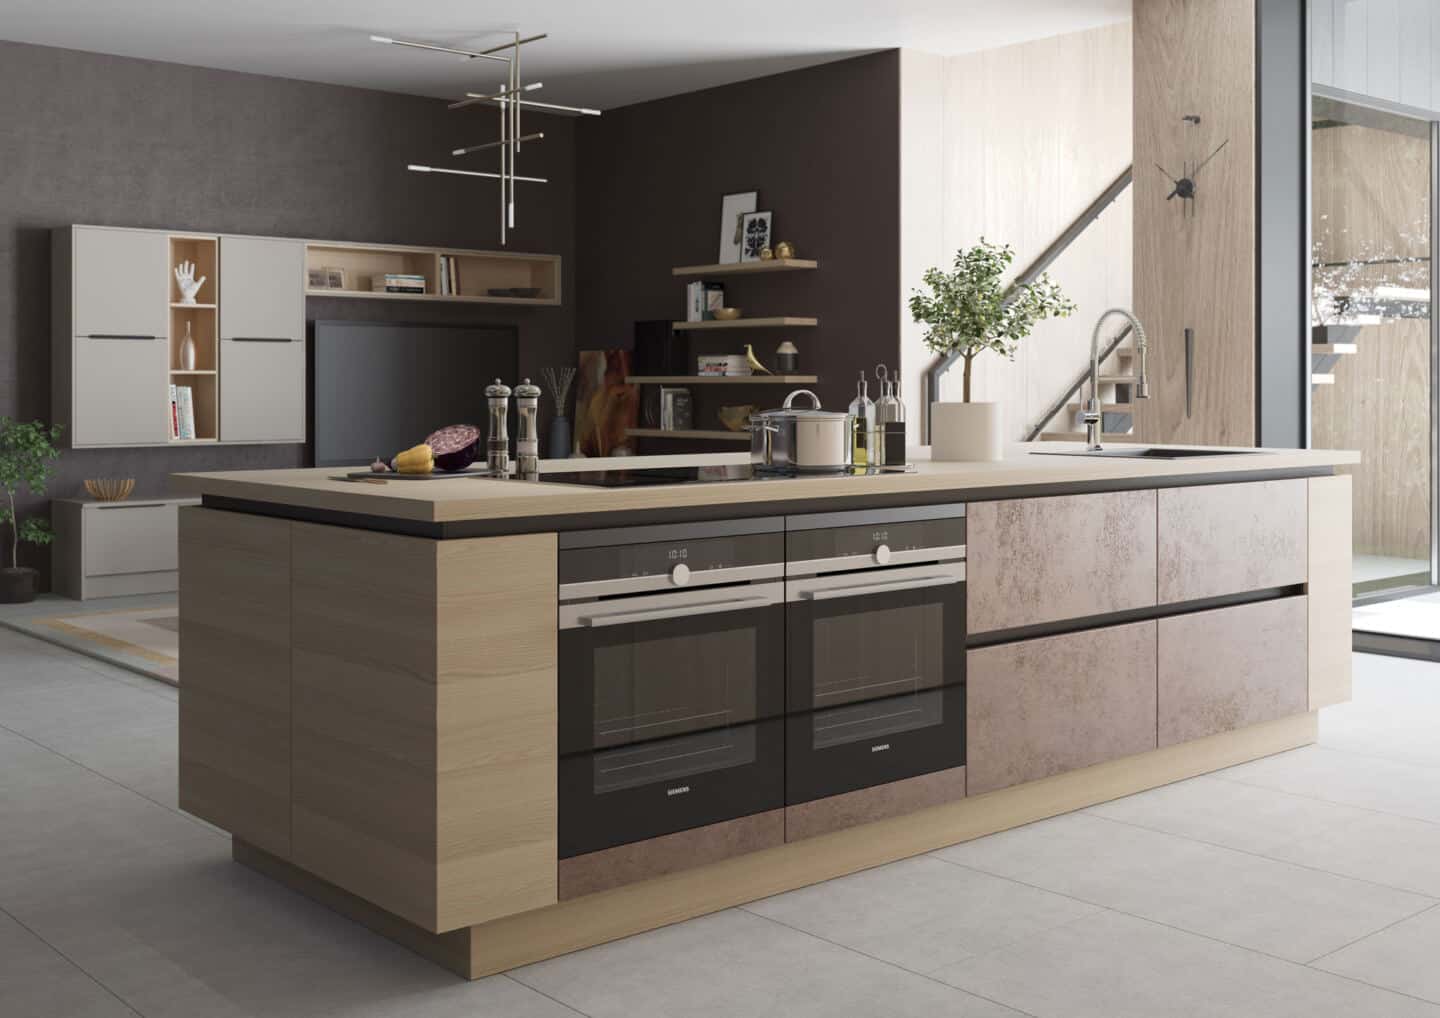 A wooden kitchen island housing double oven, hob and sink